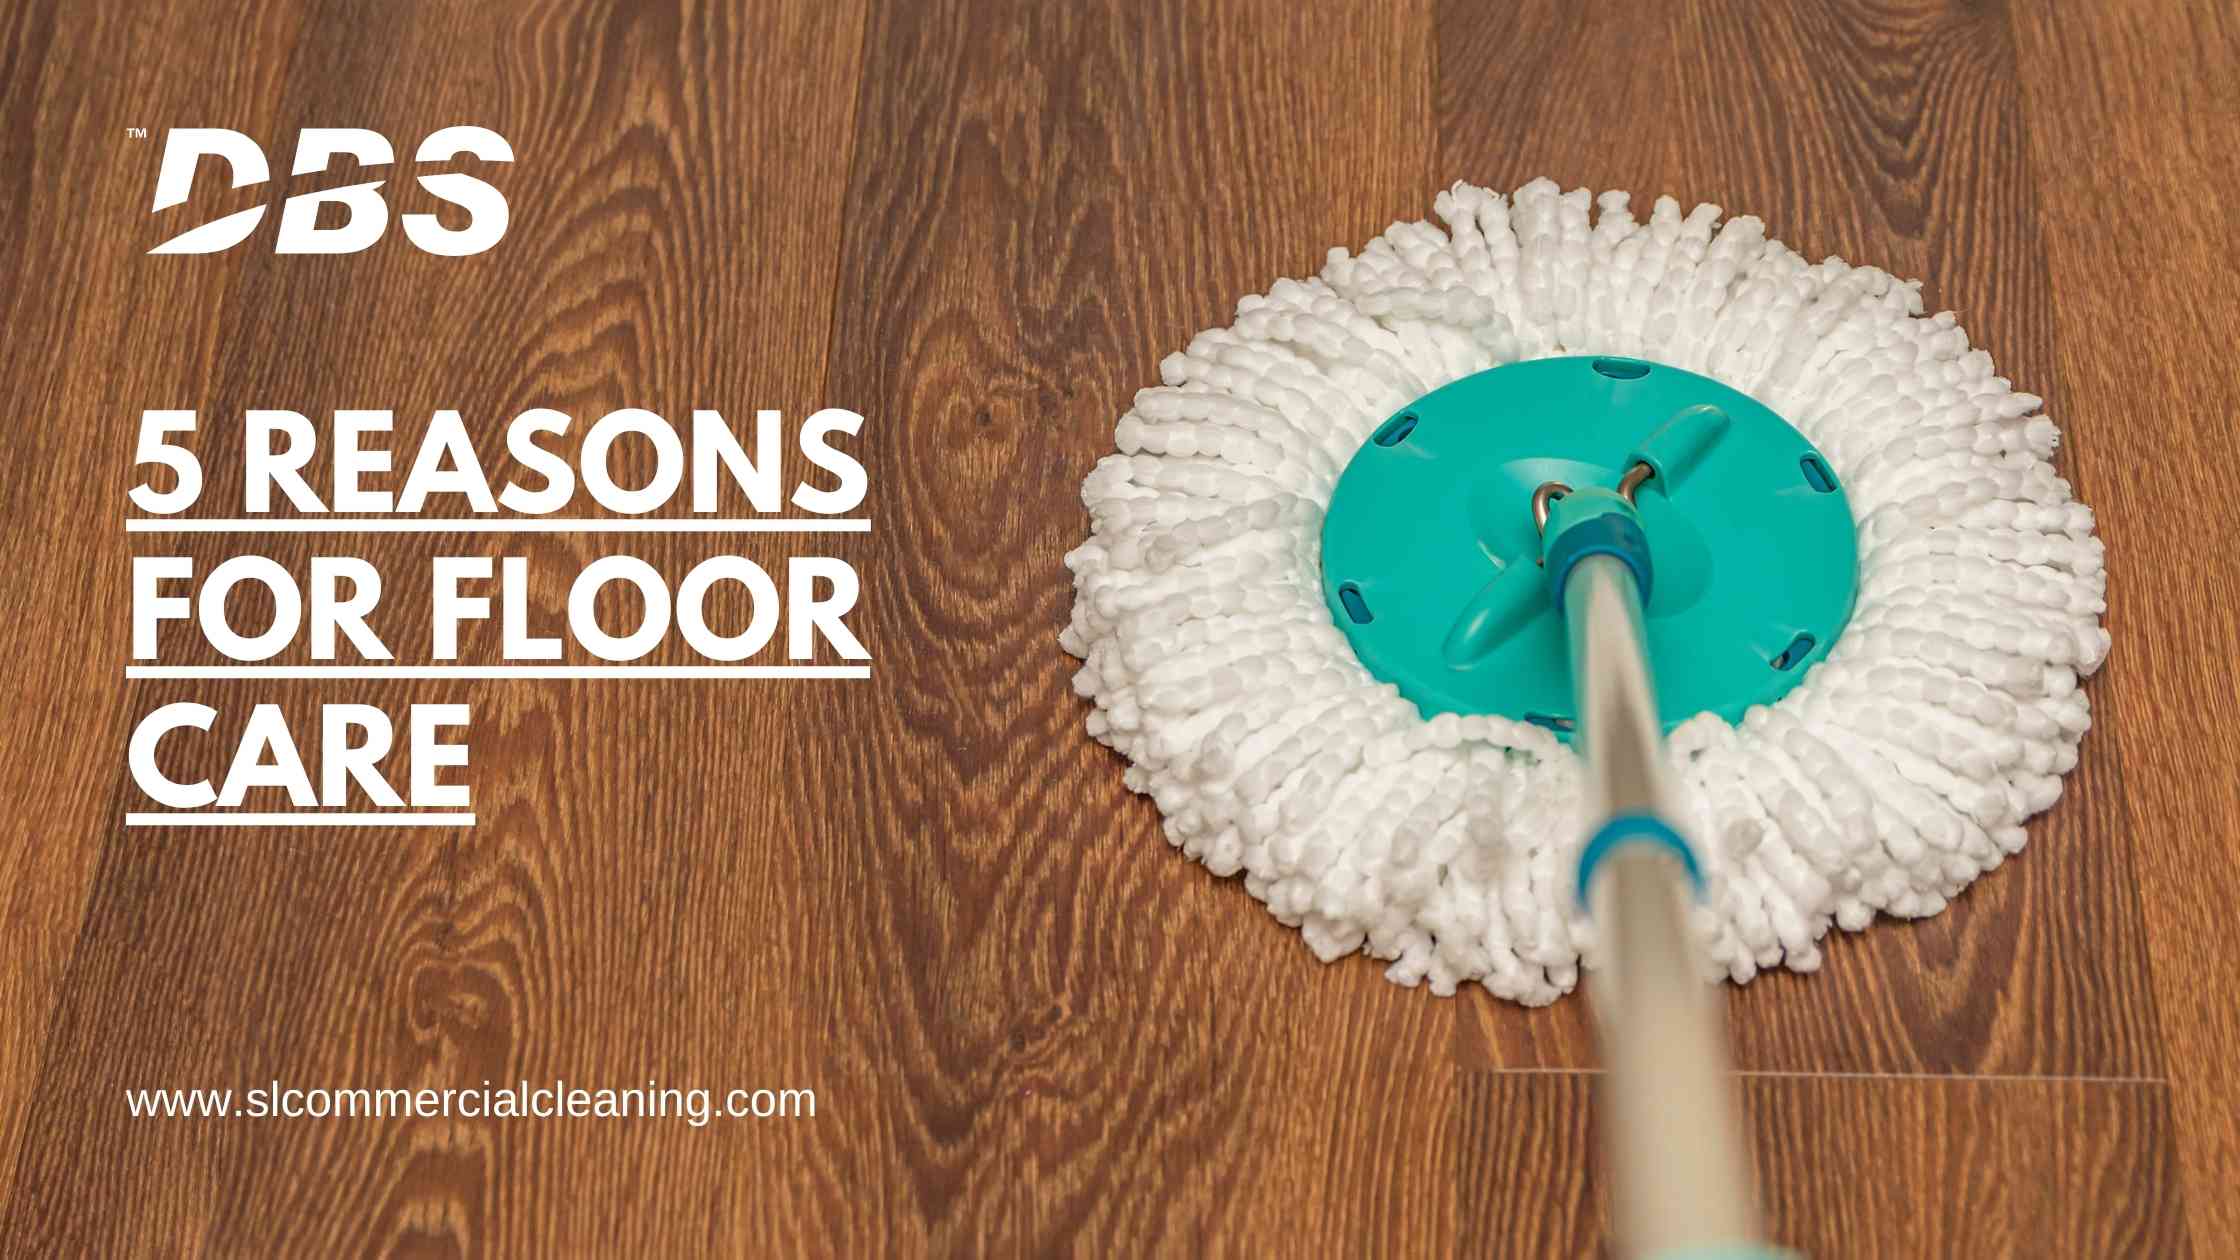 5 Reasons for Floor Care